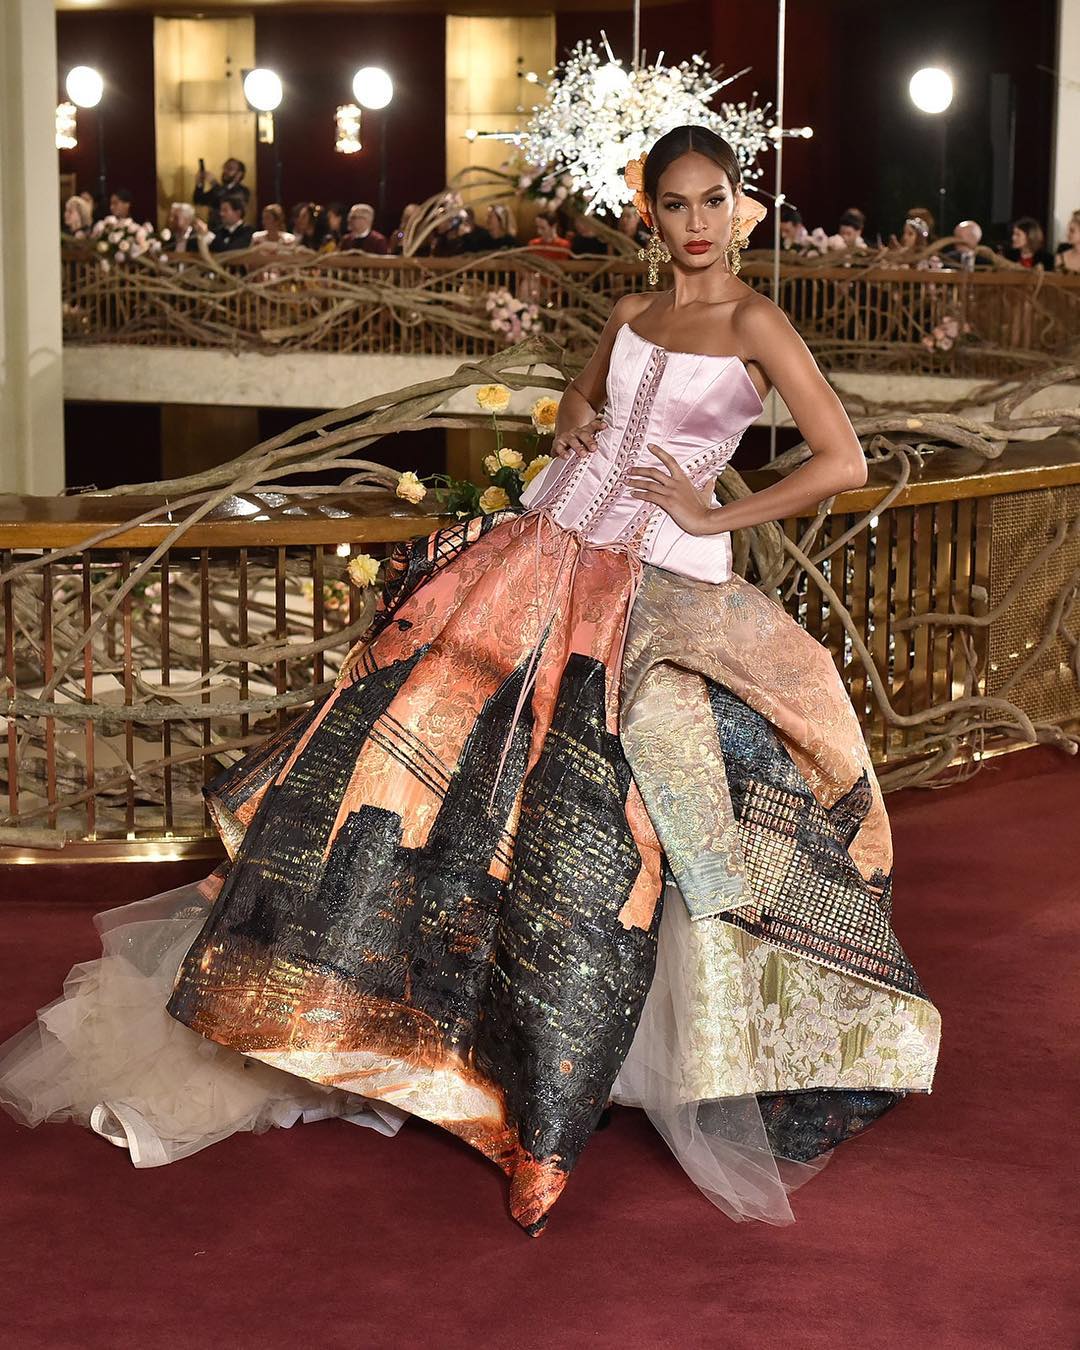 dolce-and-gabbana-presents-an-epic-alta-moda-couture-collection-in-new-york-city